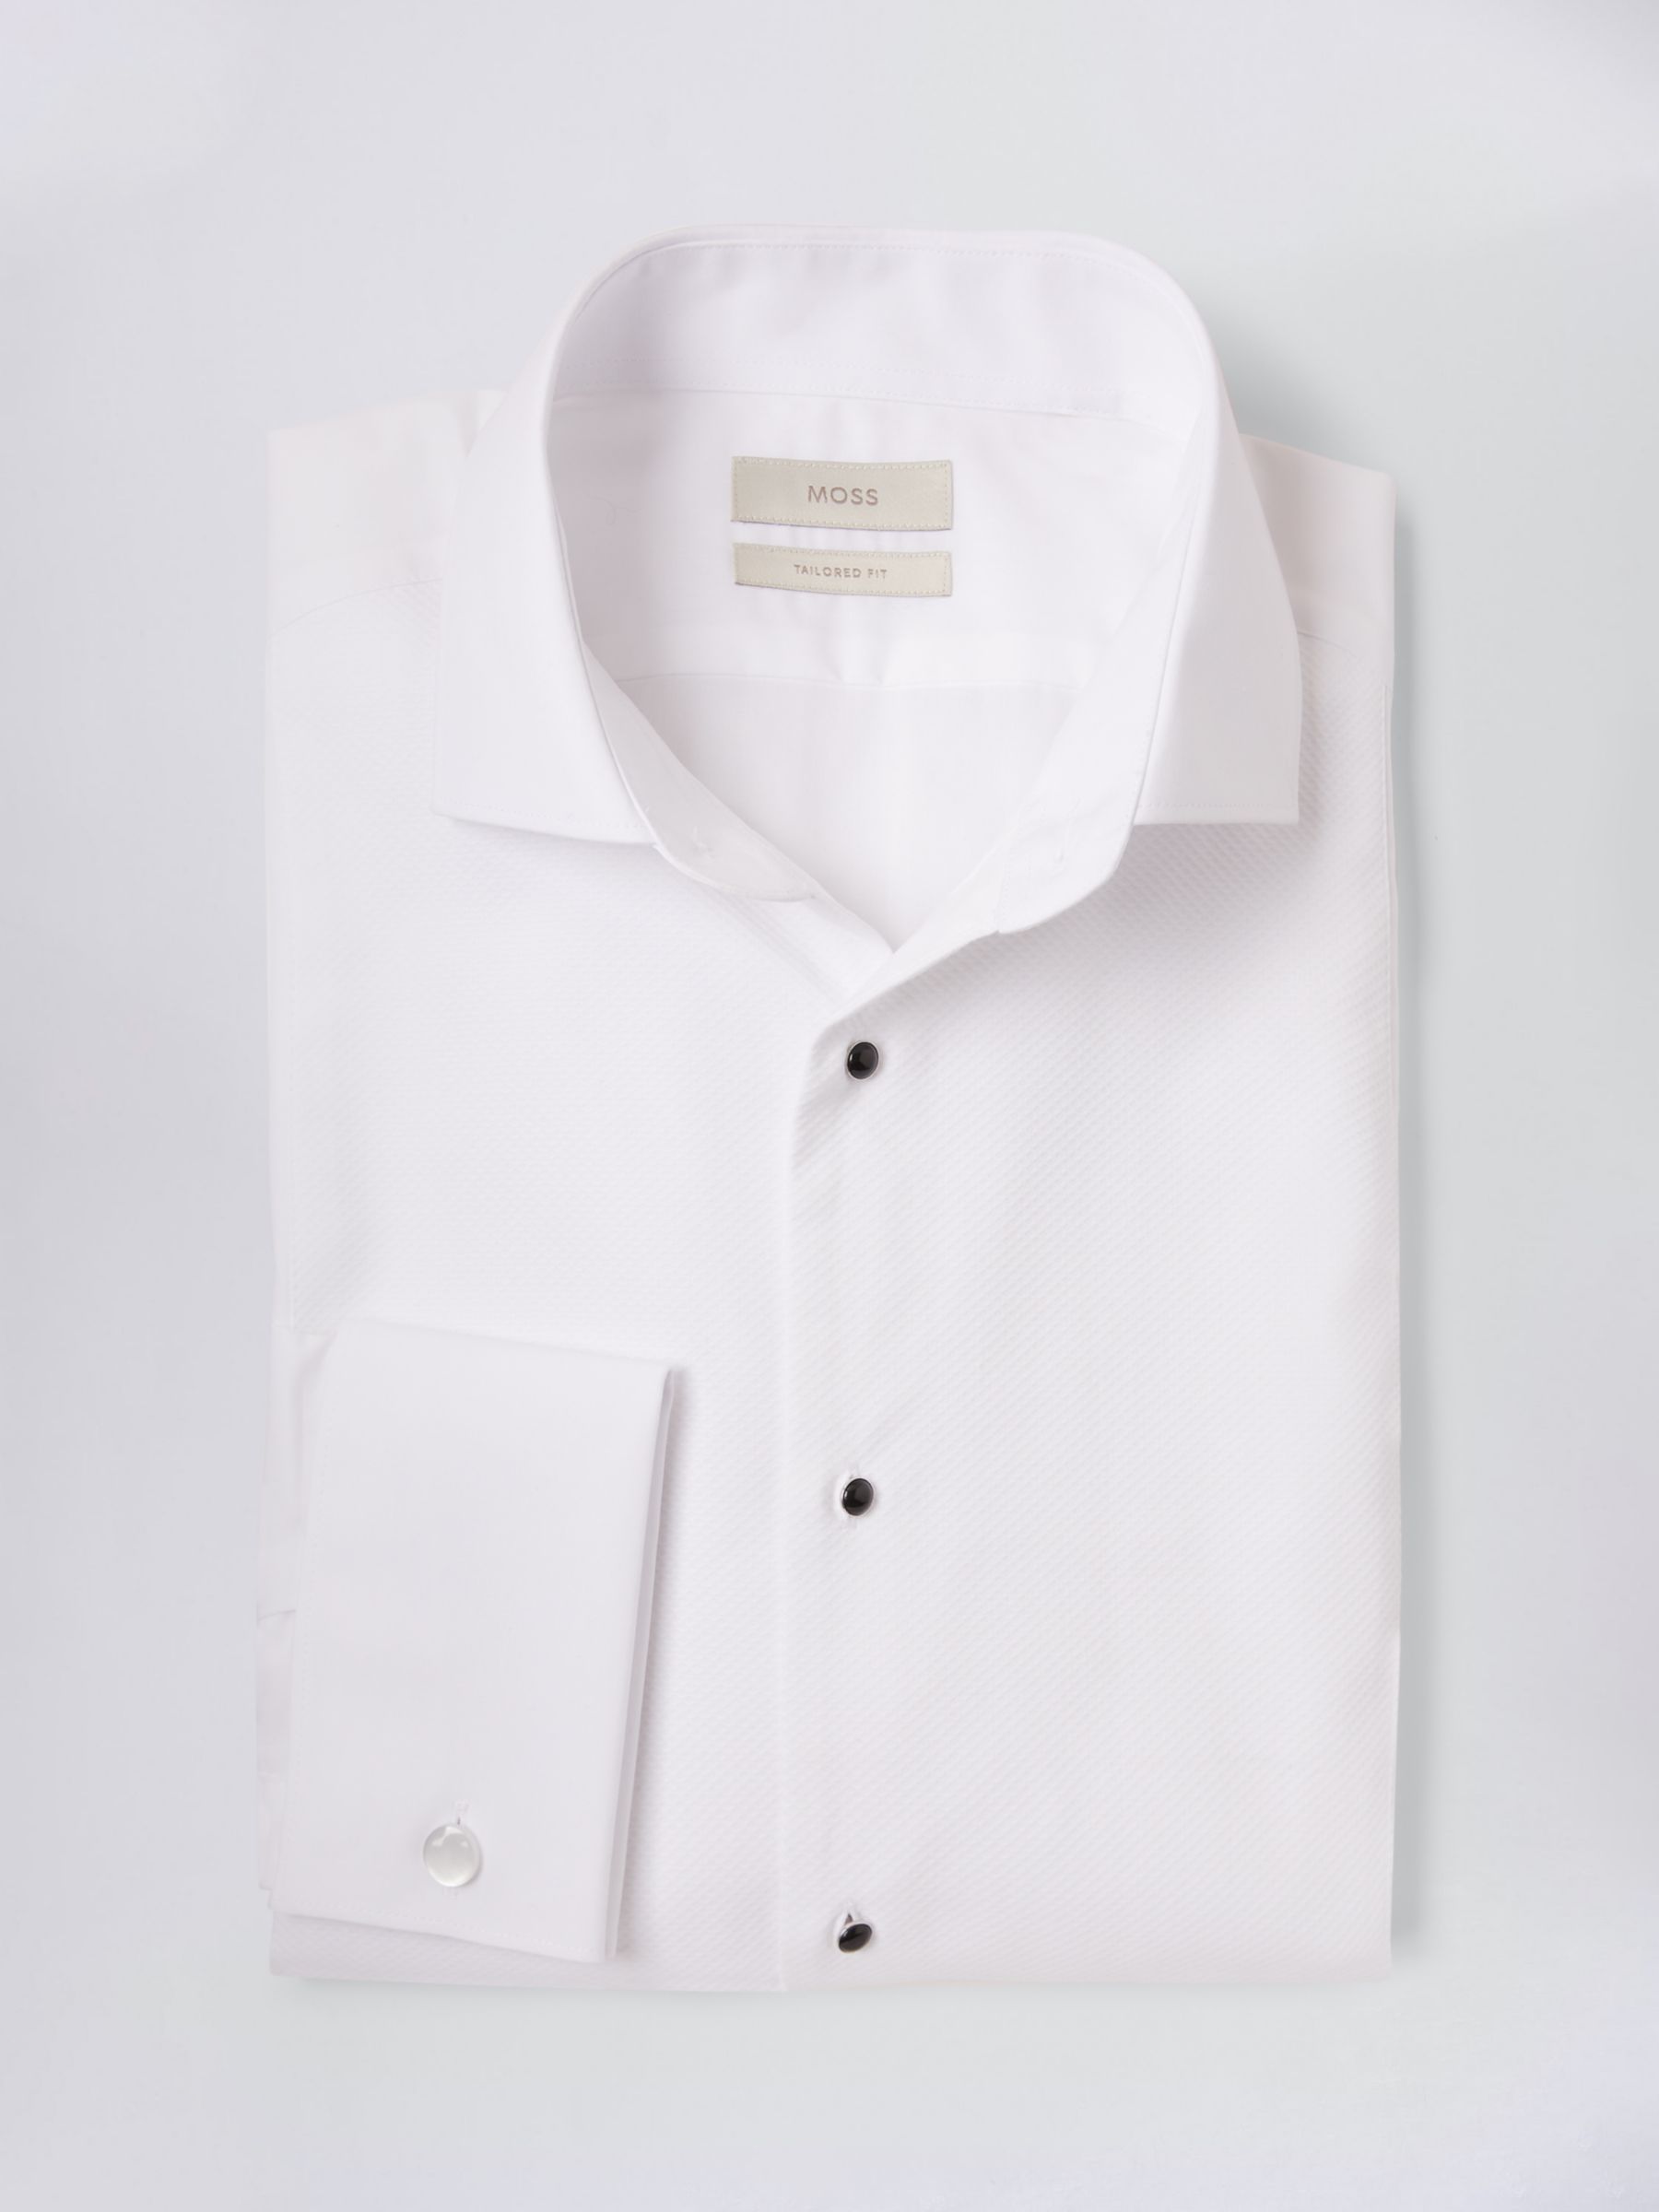 Buy Moss Marcella Classic Collar Dress Shirt, White Online at johnlewis.com